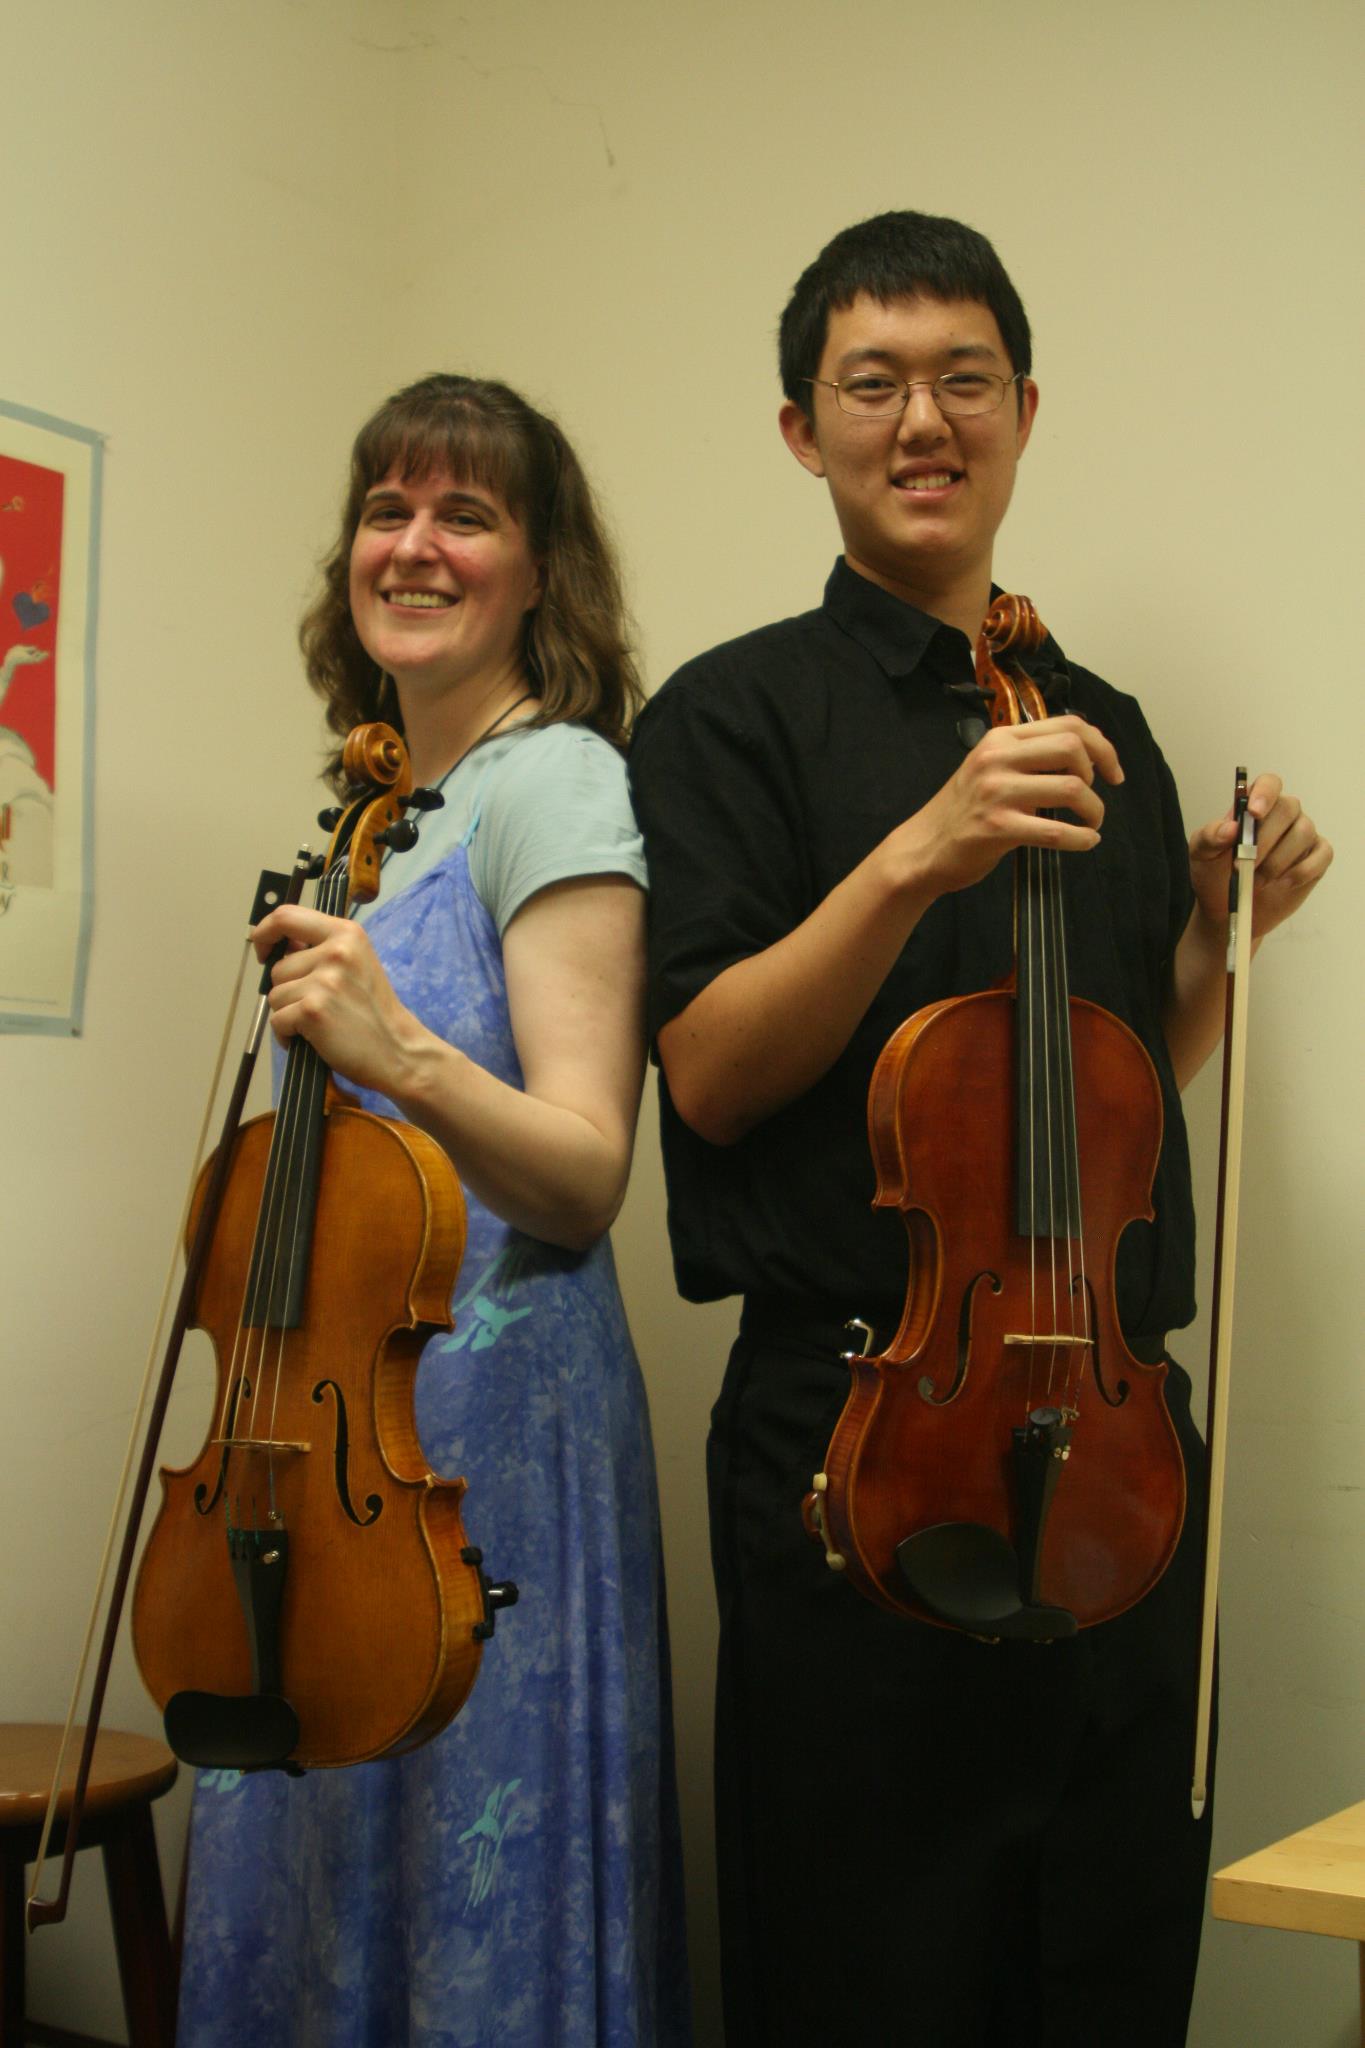 Leah in blue dress holding a viola back to back with Dan in black holding a viola with a white background